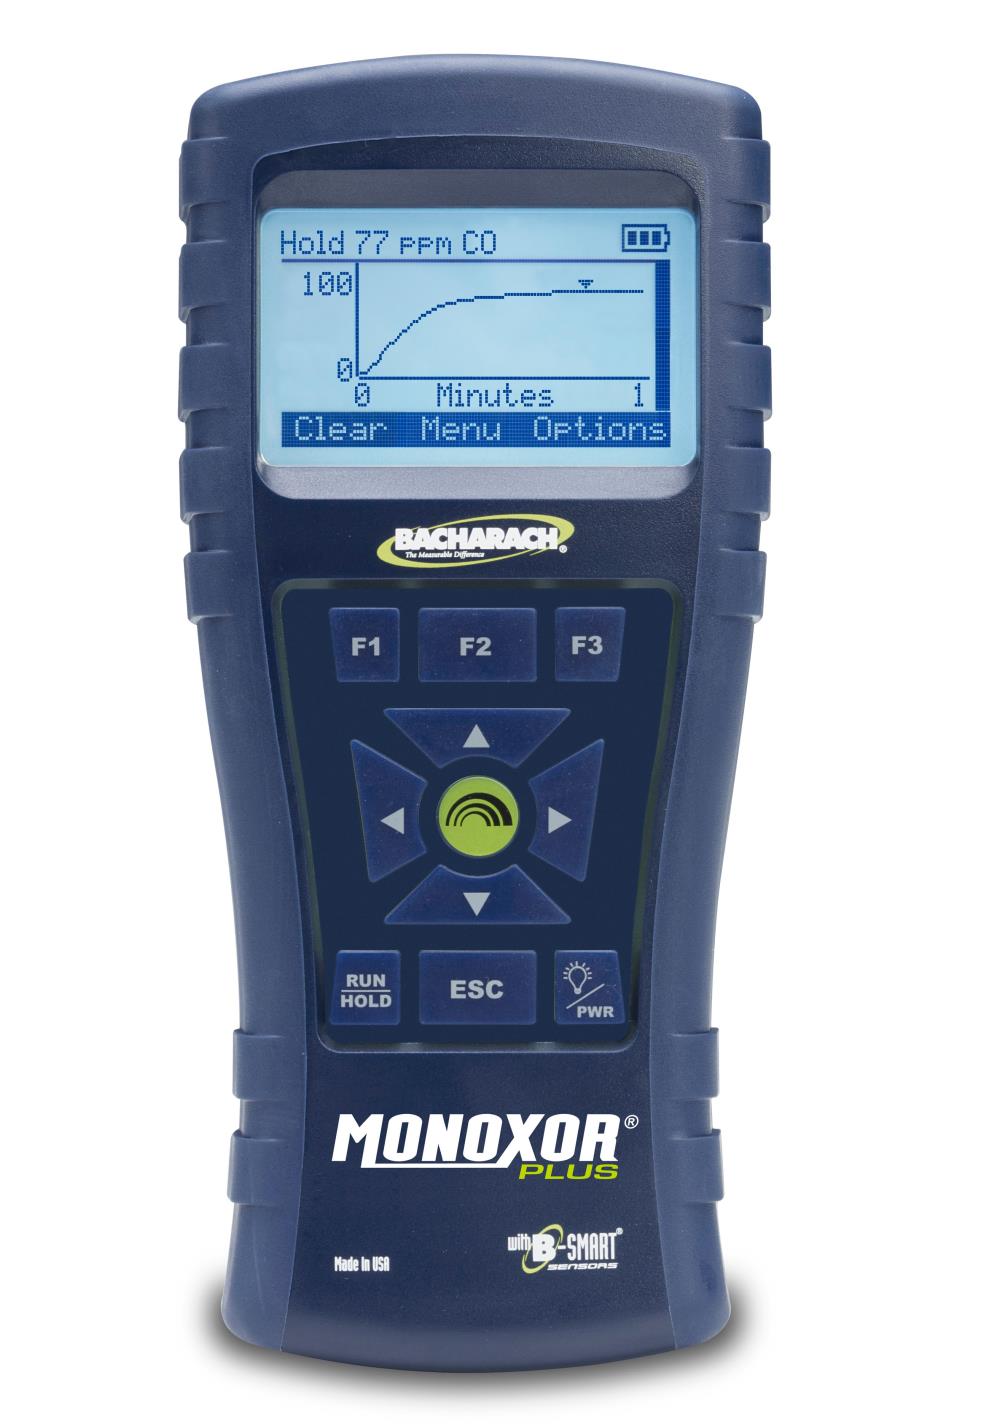 Monoxor Plus ,Safety,BACHARACH,Instruments and Controls/Laboratory Equipment